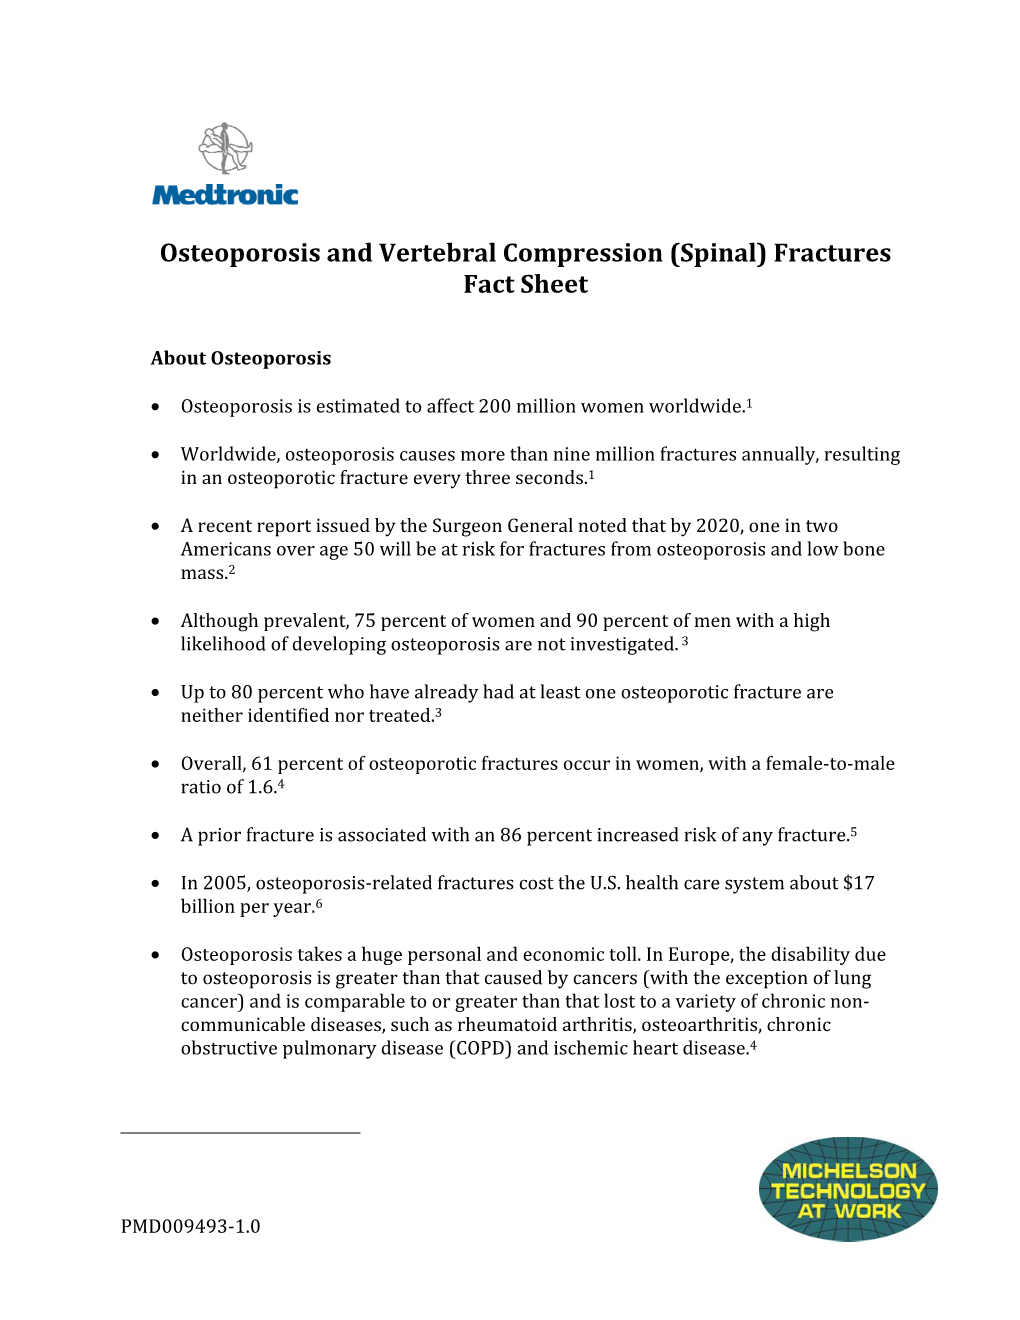 Osteoporosis and Vertebral Compression (Spinal) Fractures Fact Sheet